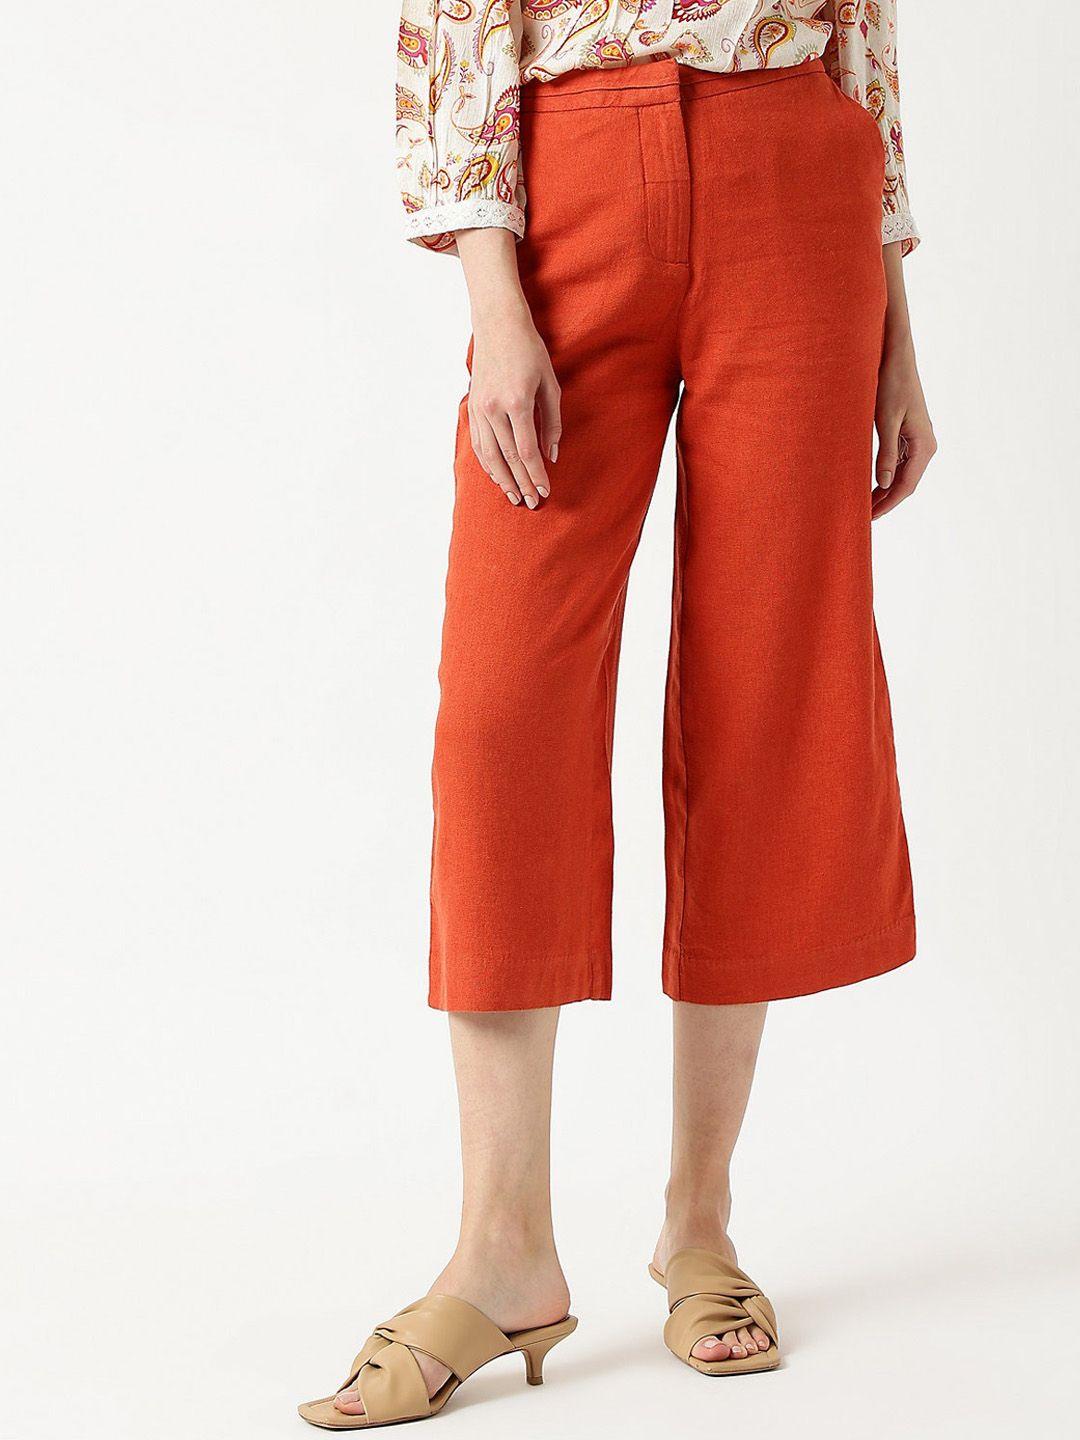 marks-&-spencer-women-high-rise-culottes-trousers